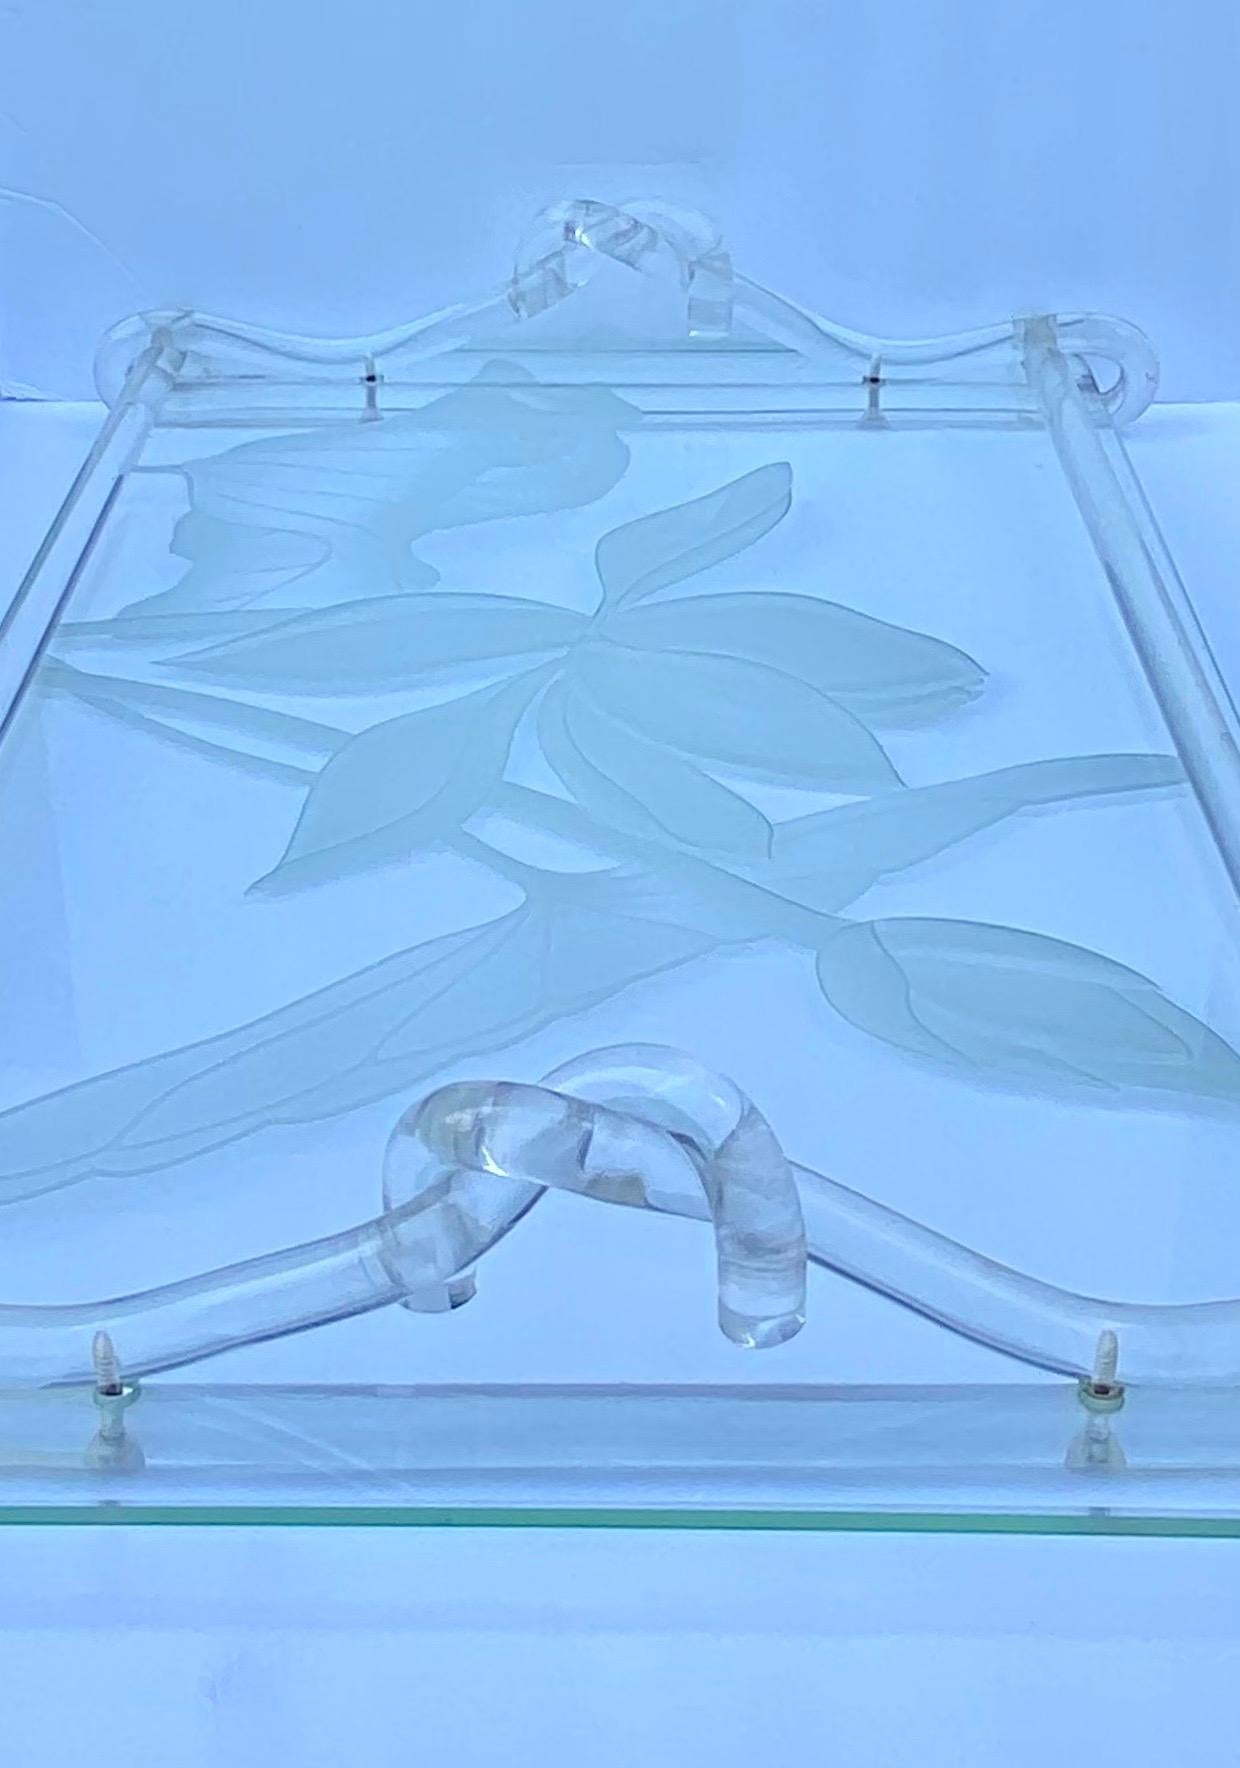 Hollywood Regency Dorothy Thorpe frosted glass and lucite tray, mid-20th century. Rectangular tray with intaglio-etched floral lily pad floral decoration and intertwined lucite pretzel form rod handles.

Marked with Dorothy C Thorpe initials “dTc”